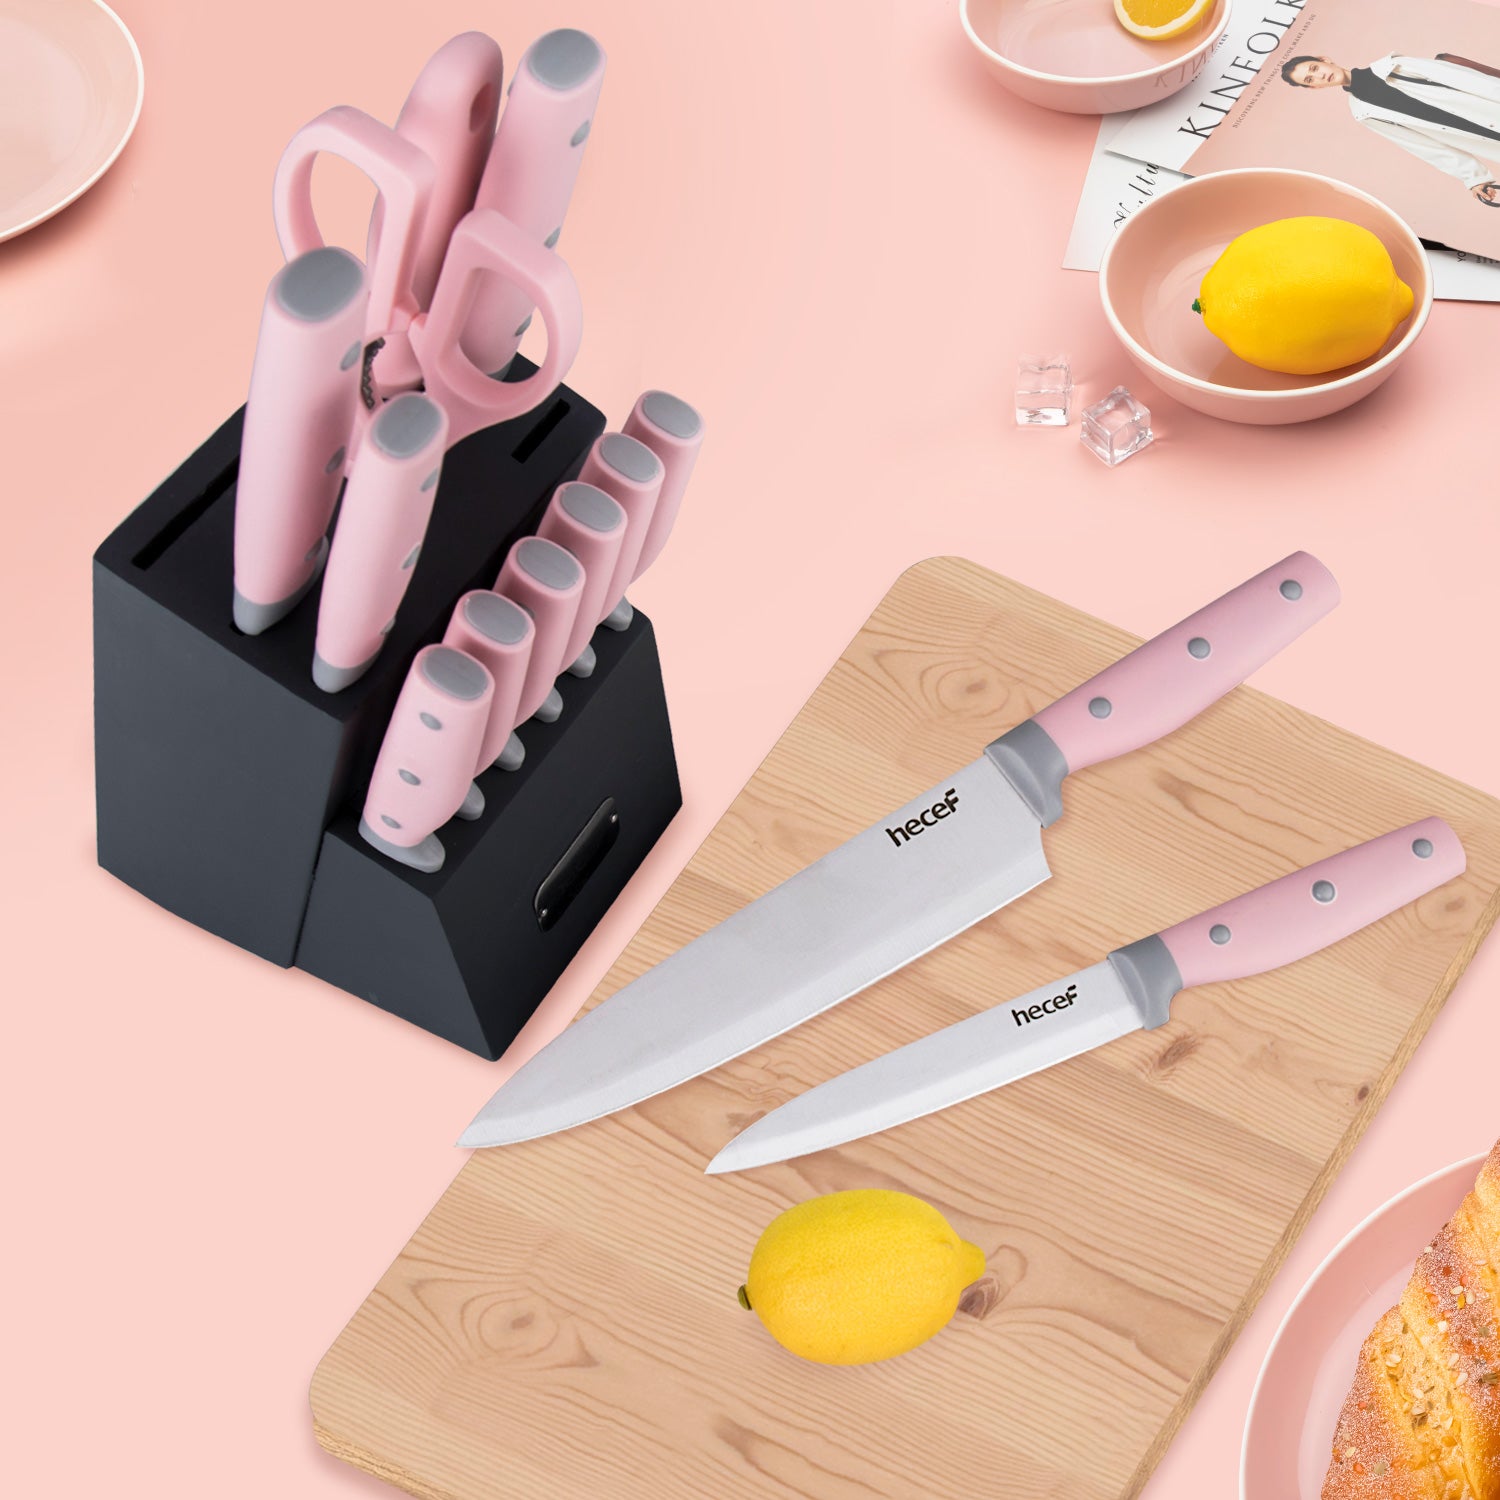  hecef Yellow Combo, 5 Pcs Cute Kitchen Knife Block Set with  Wooden Block Yellow, 32 PCS Silicone Cooking Utensils Set Yellow: Home &  Kitchen